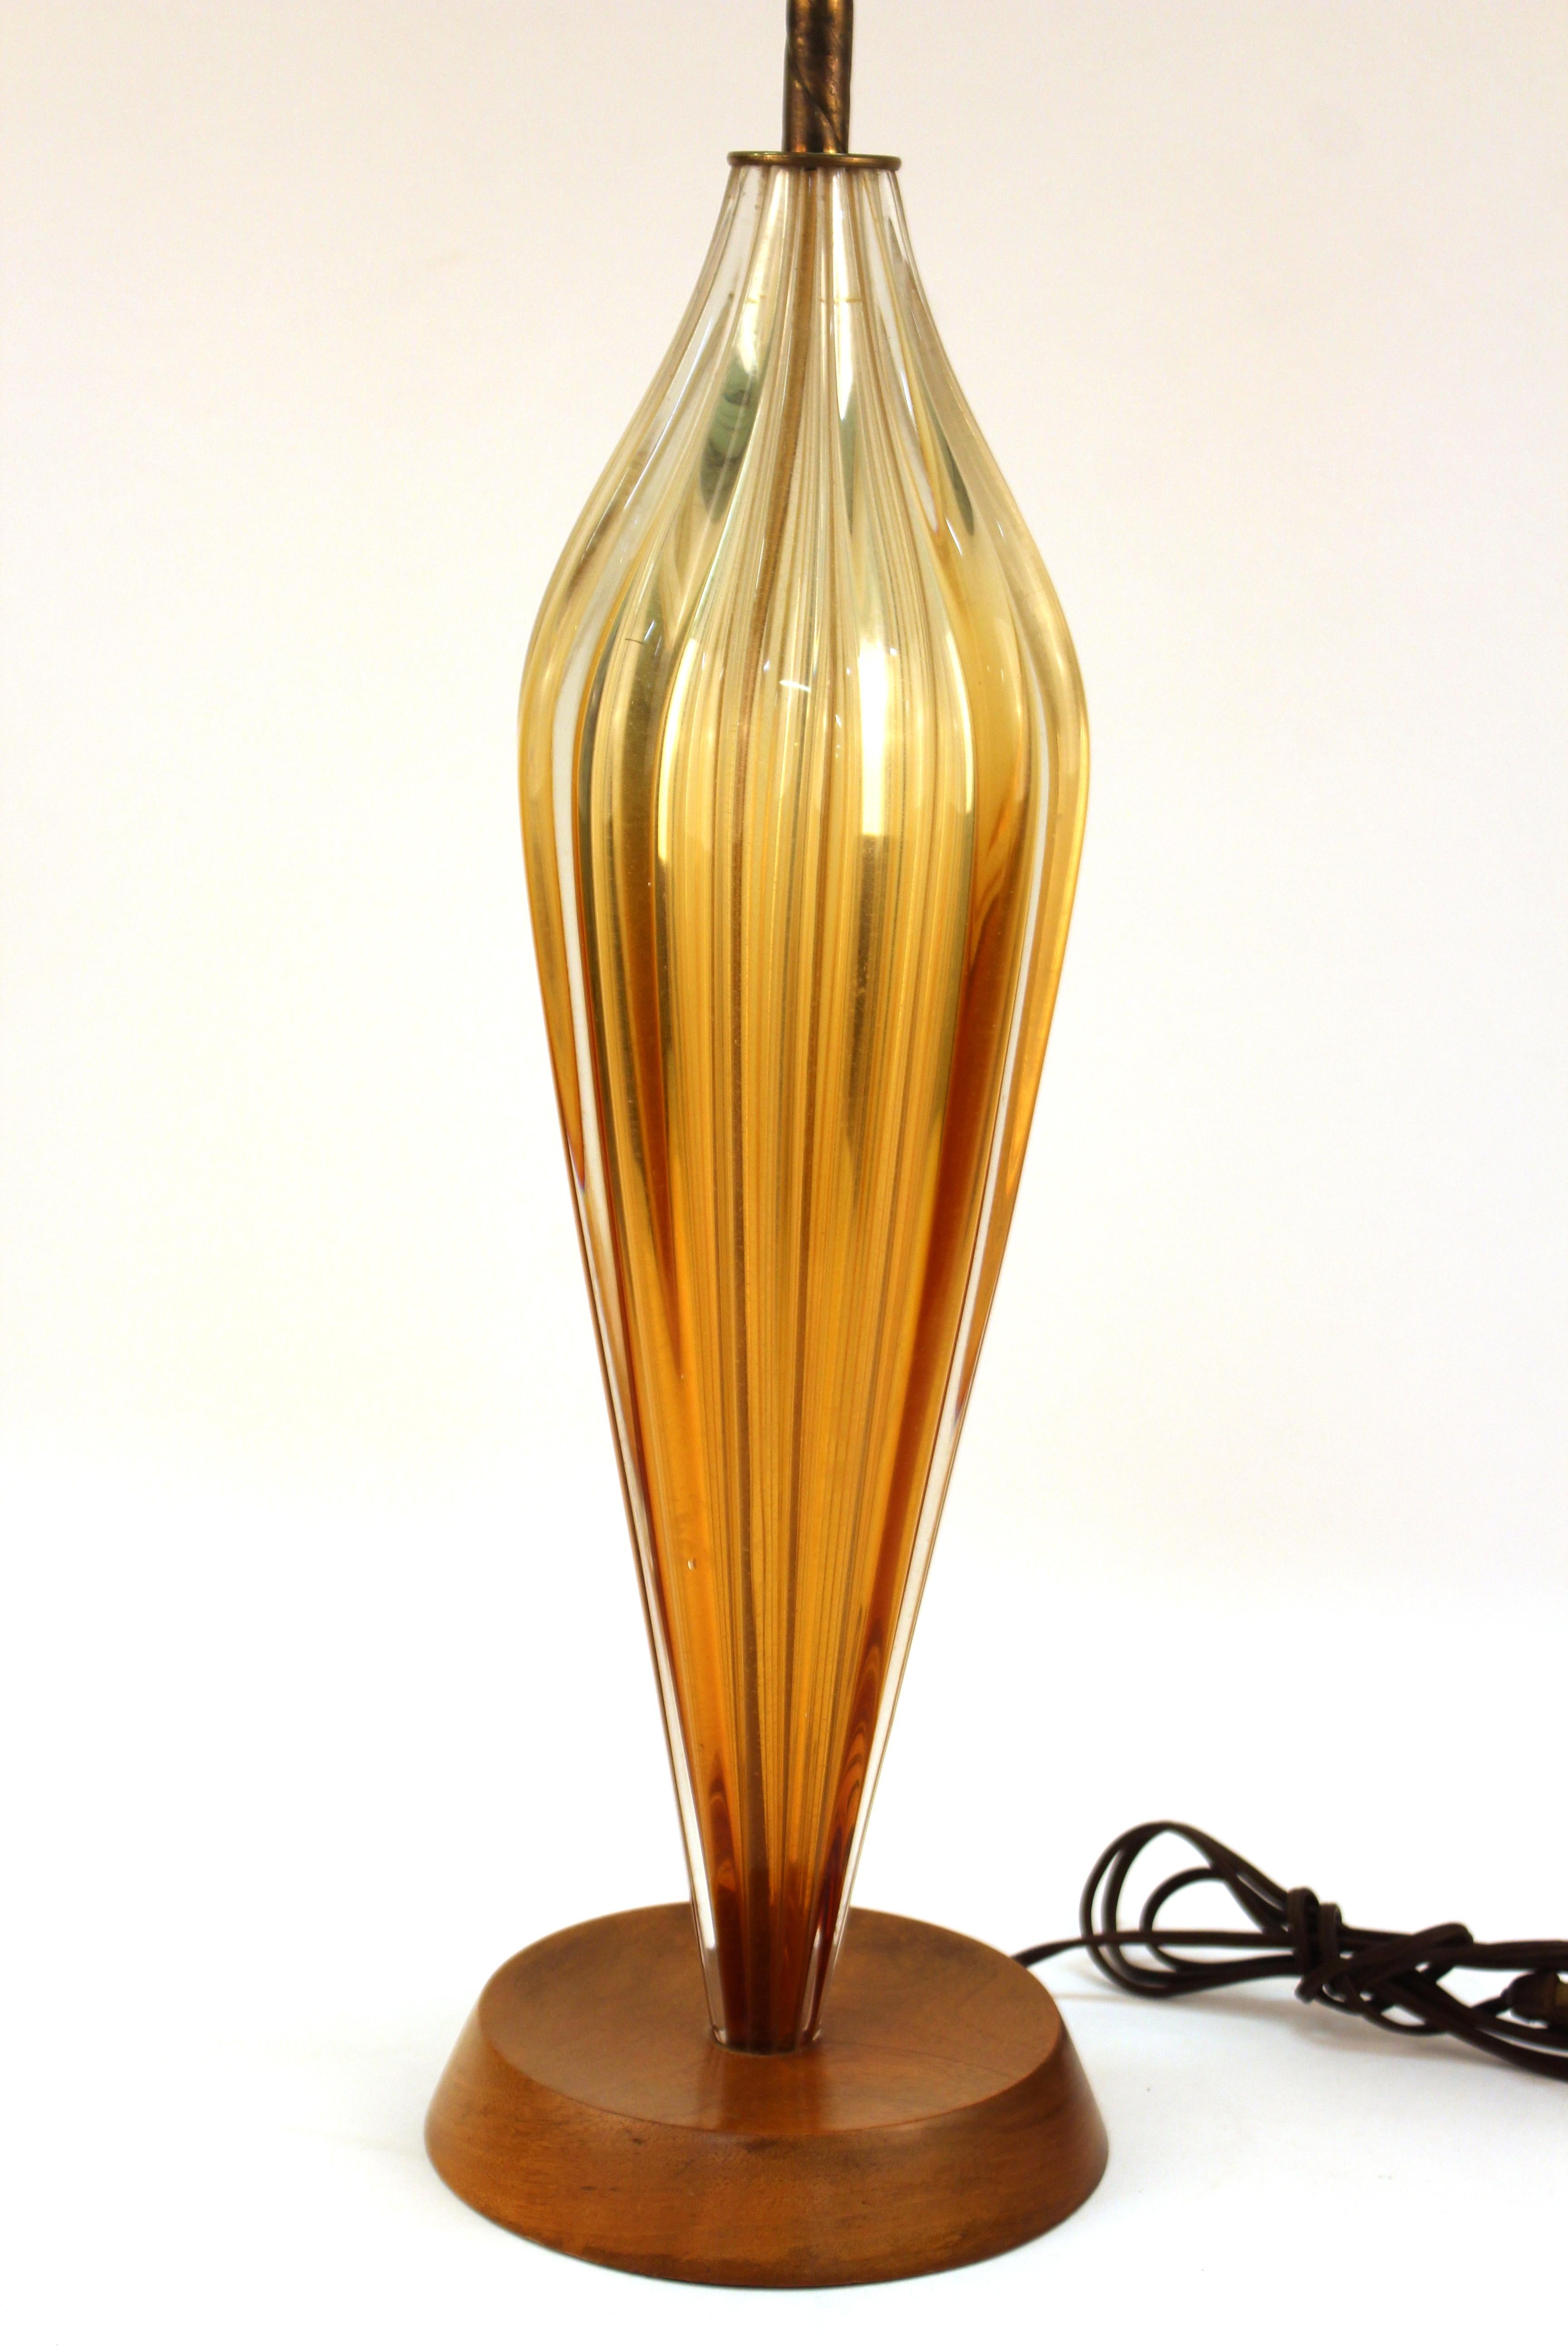 Italian Mid-Century Modern glass table lamp in elongated shape atop a circular wooden base. The piece is in great vintage condition with some minor age-related wear to the bottom of the base.